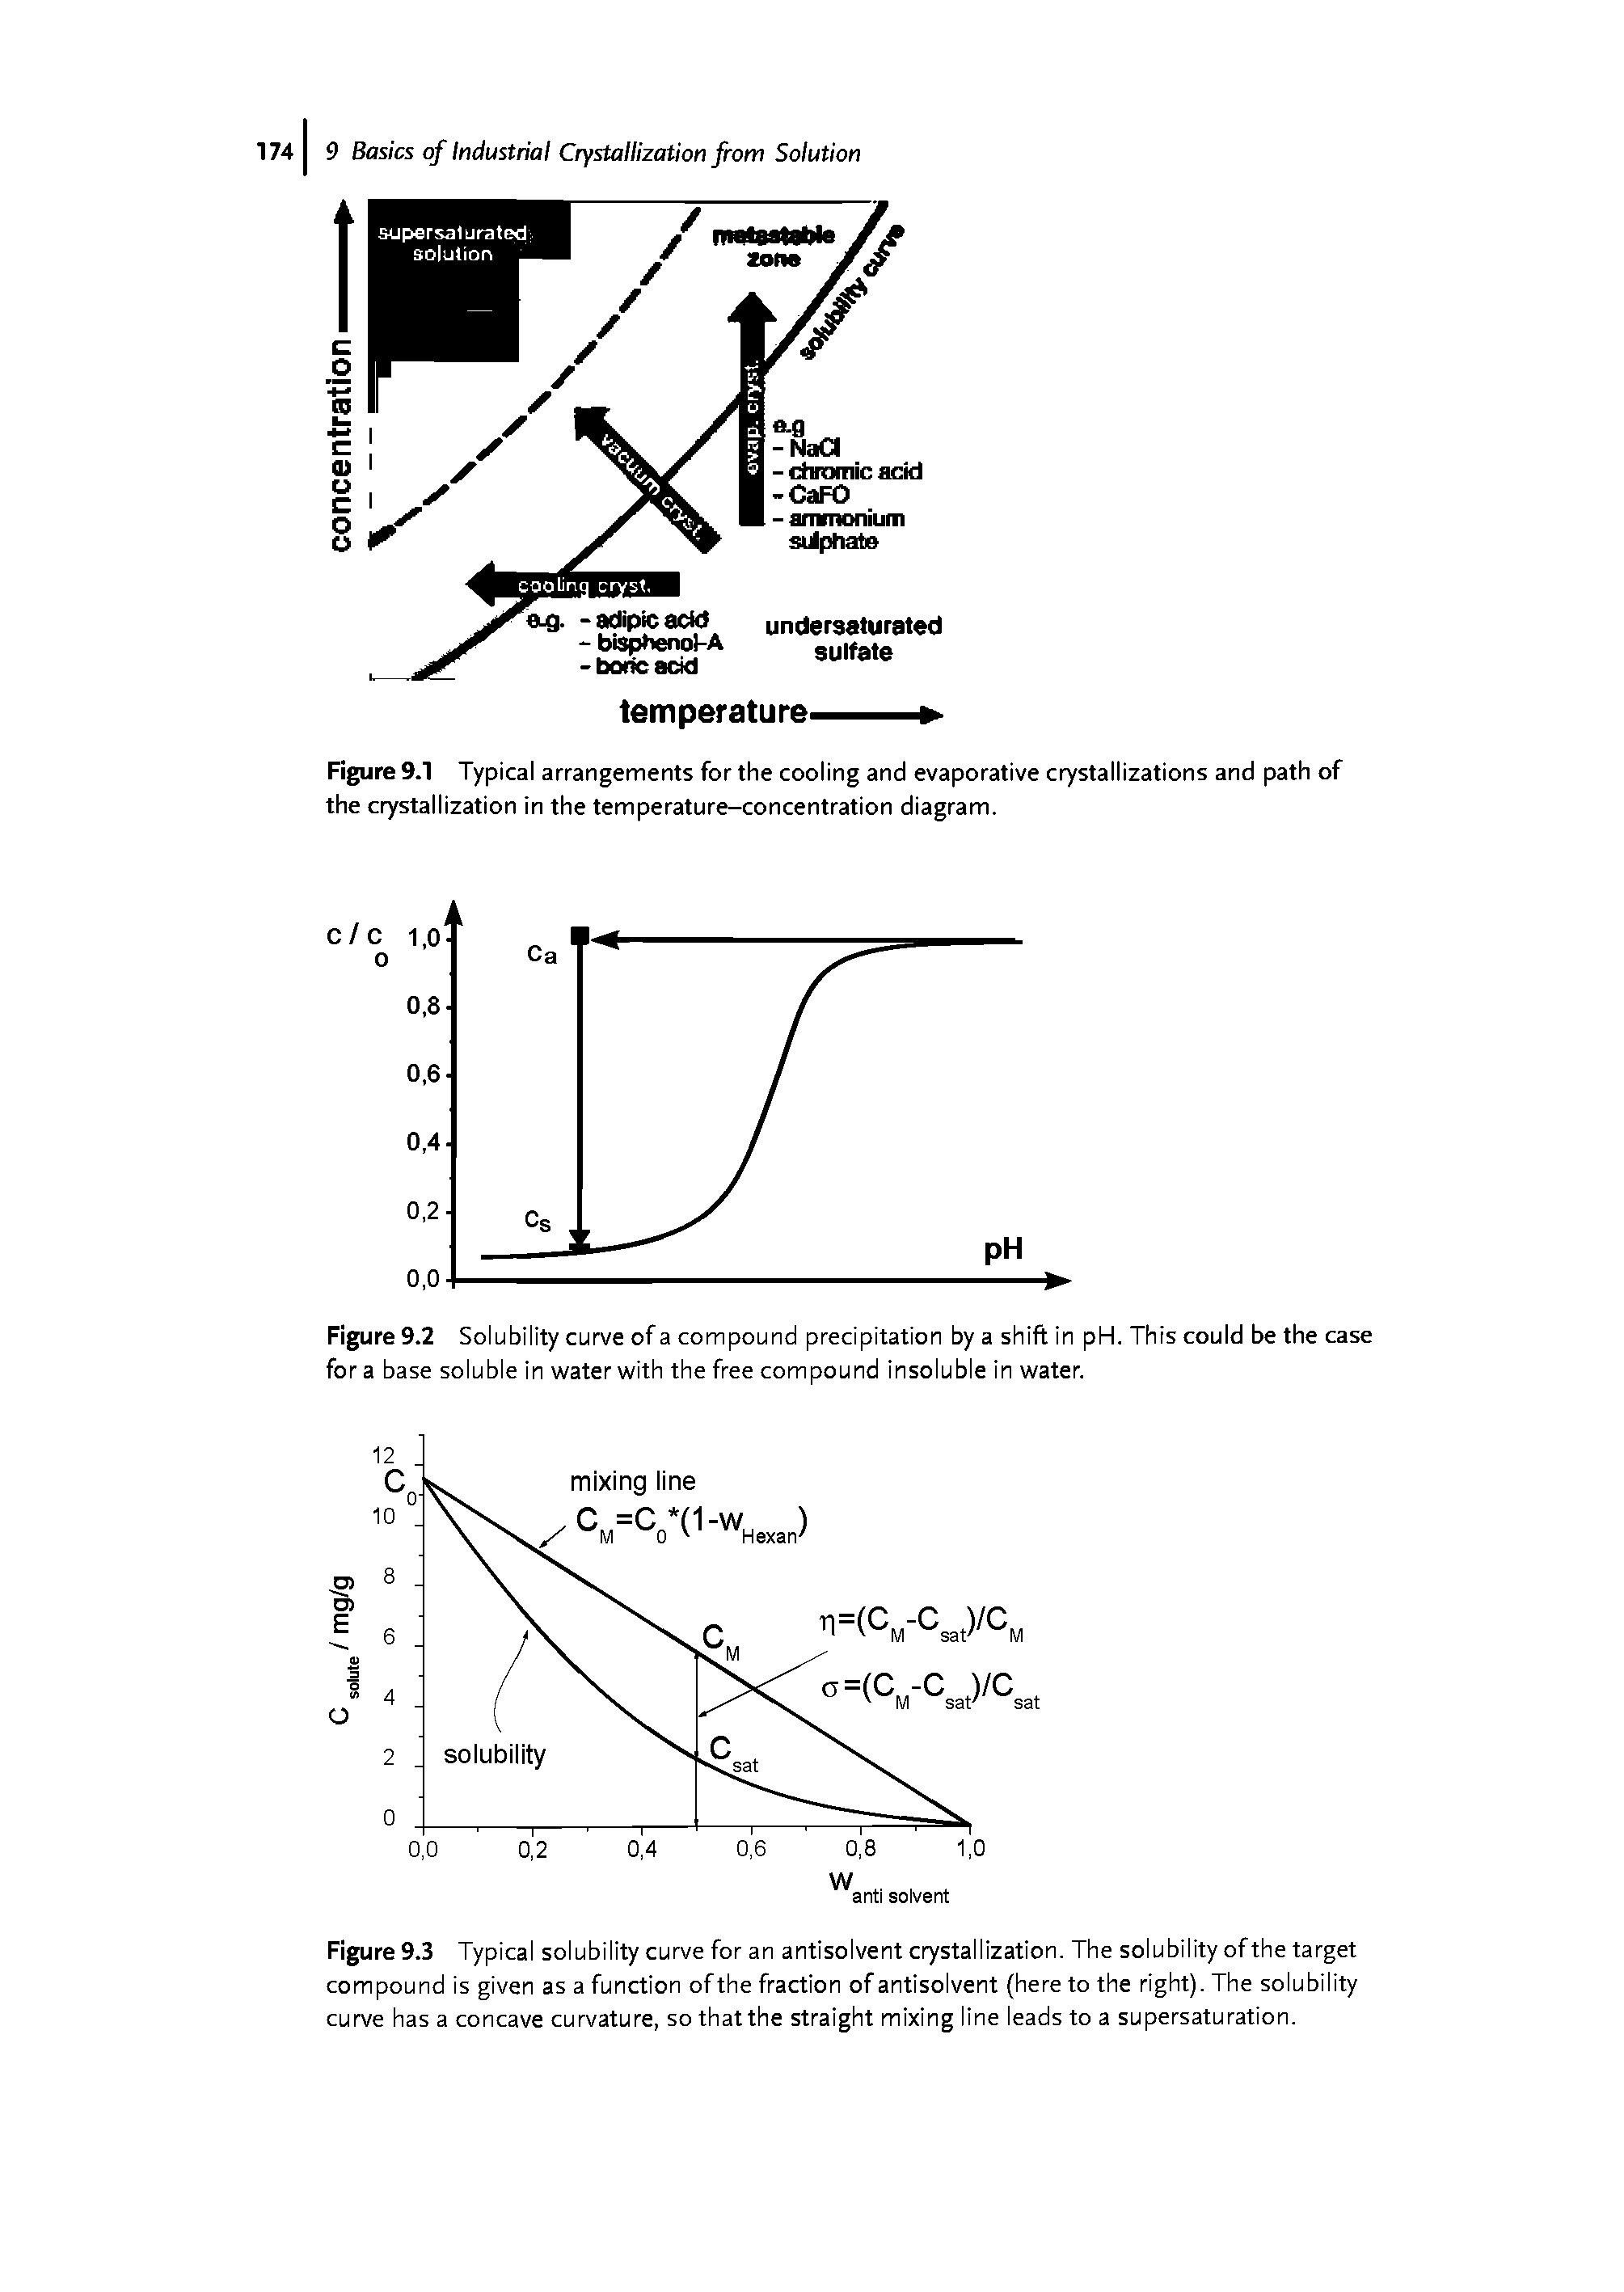 Figure 9.1 Typical arrangements for the cooling and evaporative crystallizations and path of the crystallization in the temperature-concentration diagram.